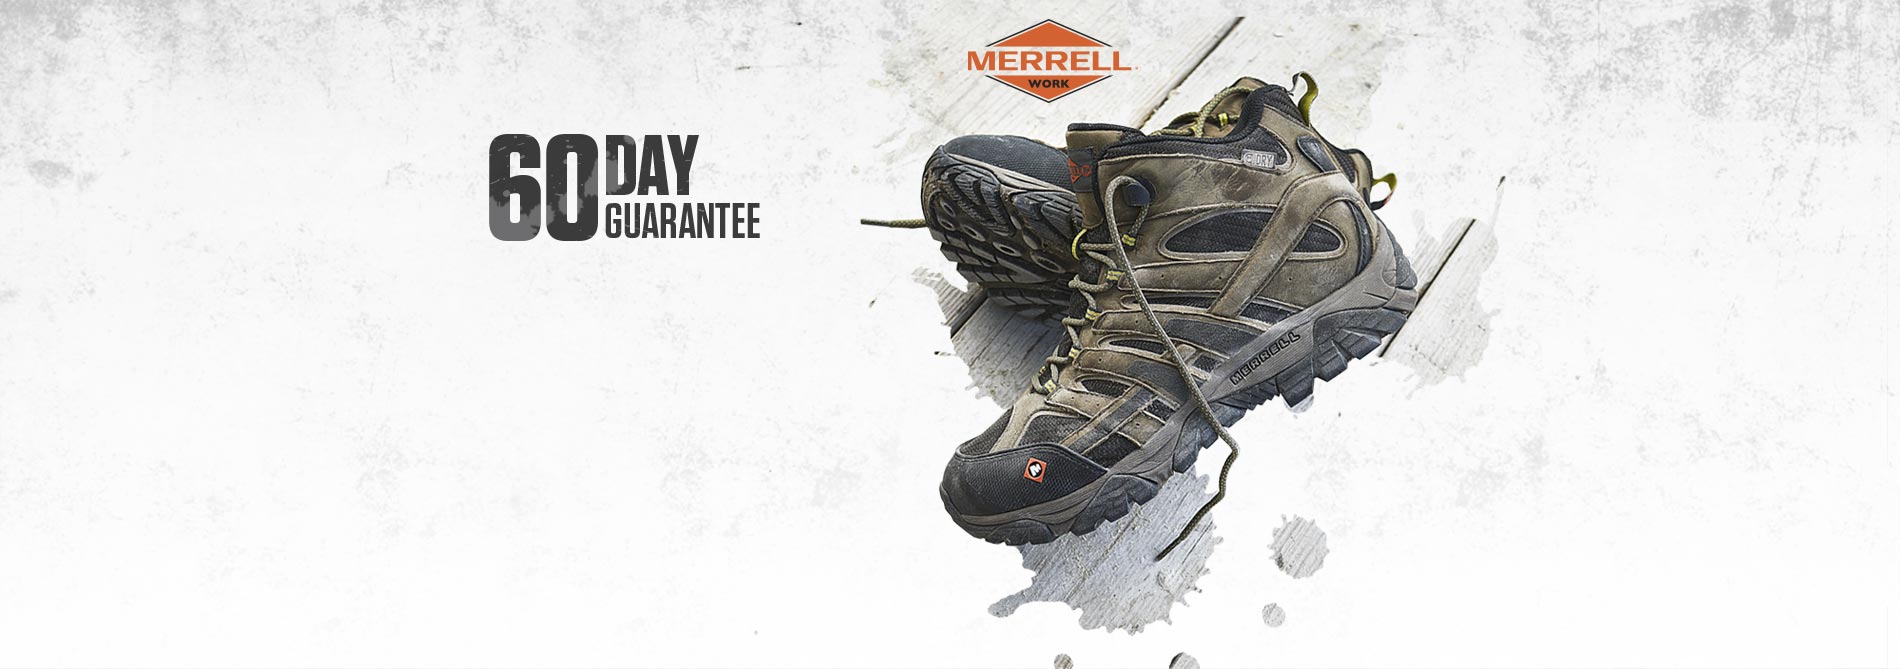 merrell shoes cyber monday